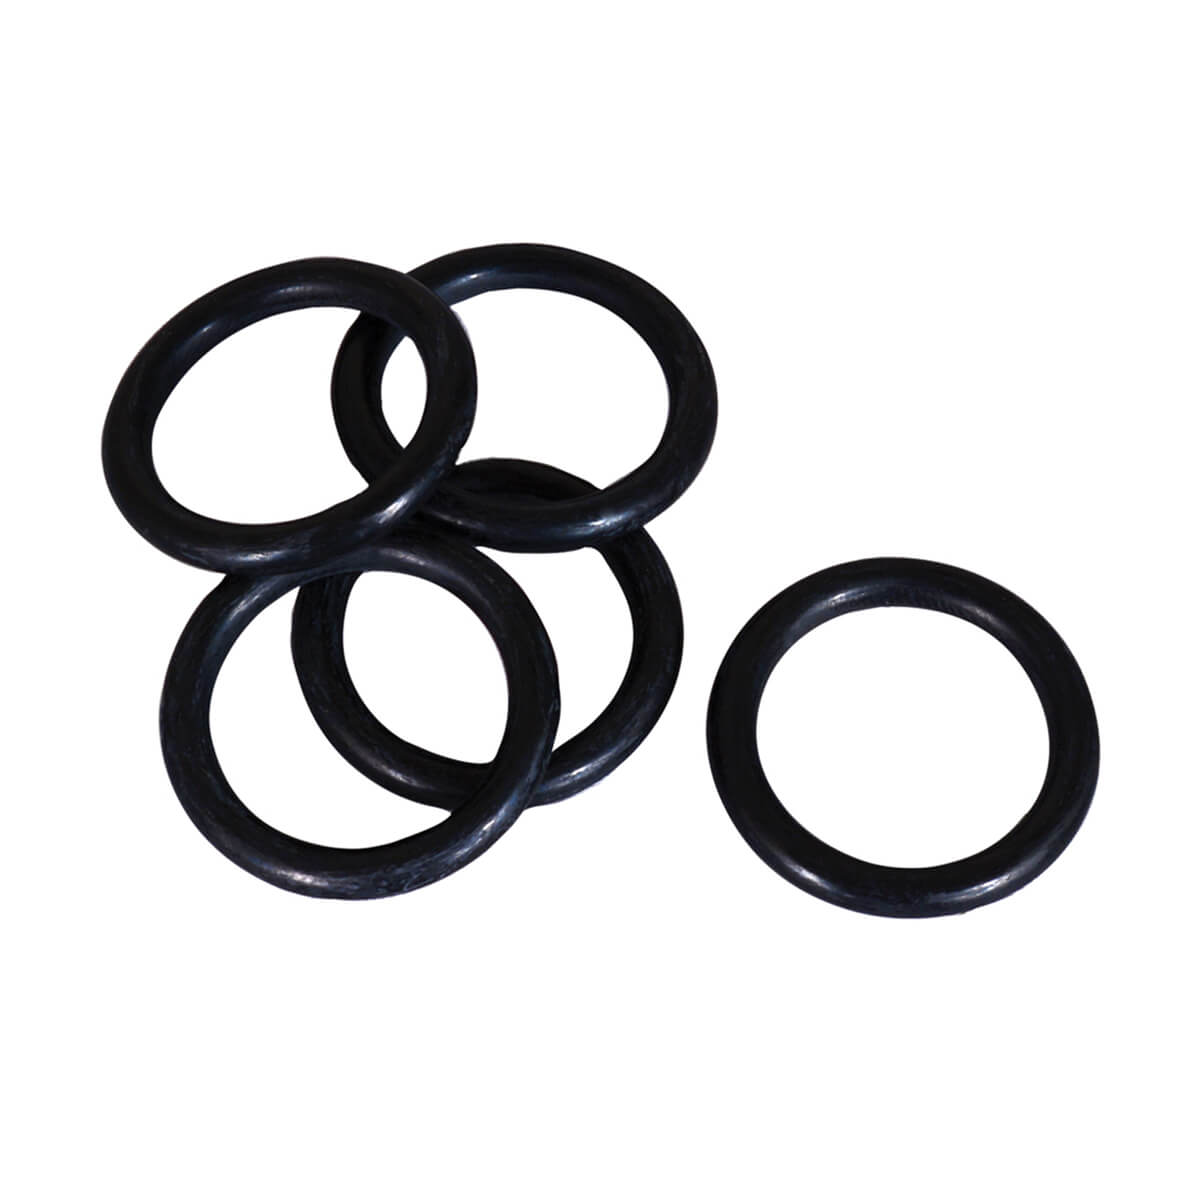 Replacement O-ring Seal Kit - 1/2-in